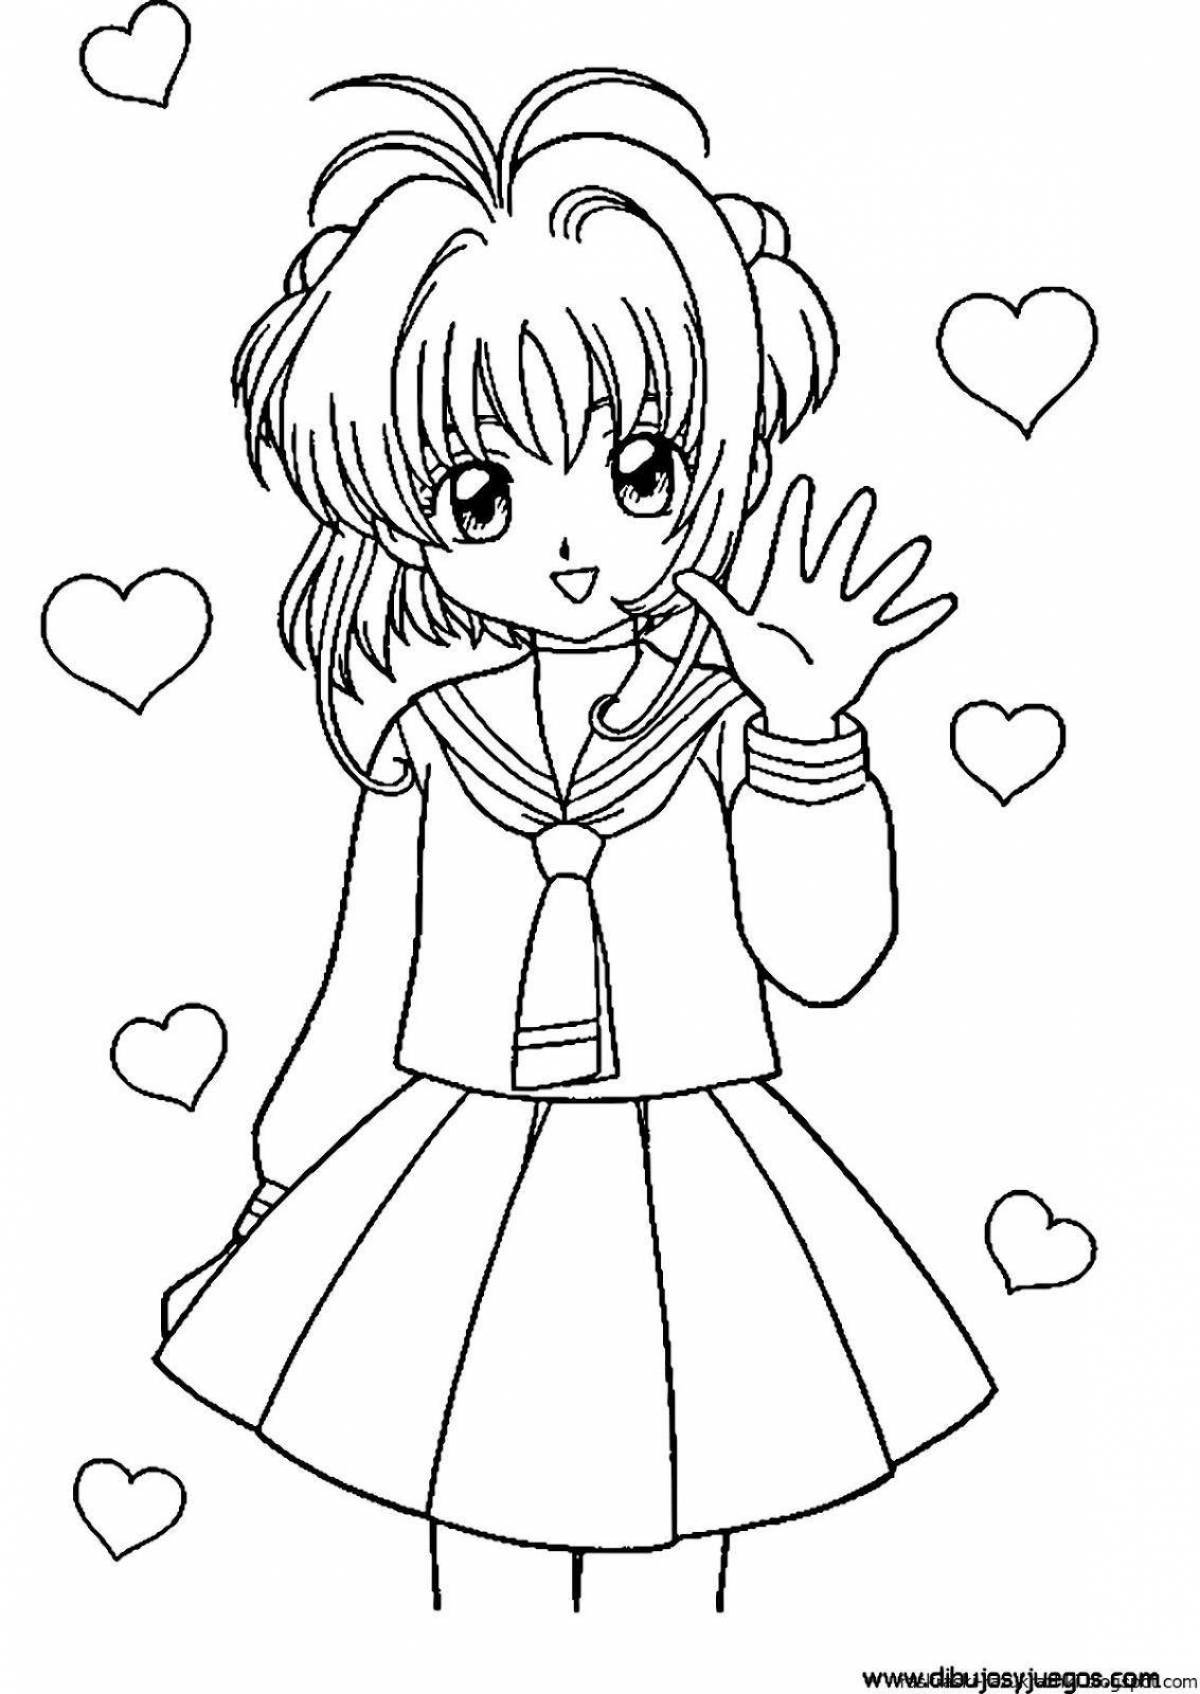 Exciting wifey coloring page